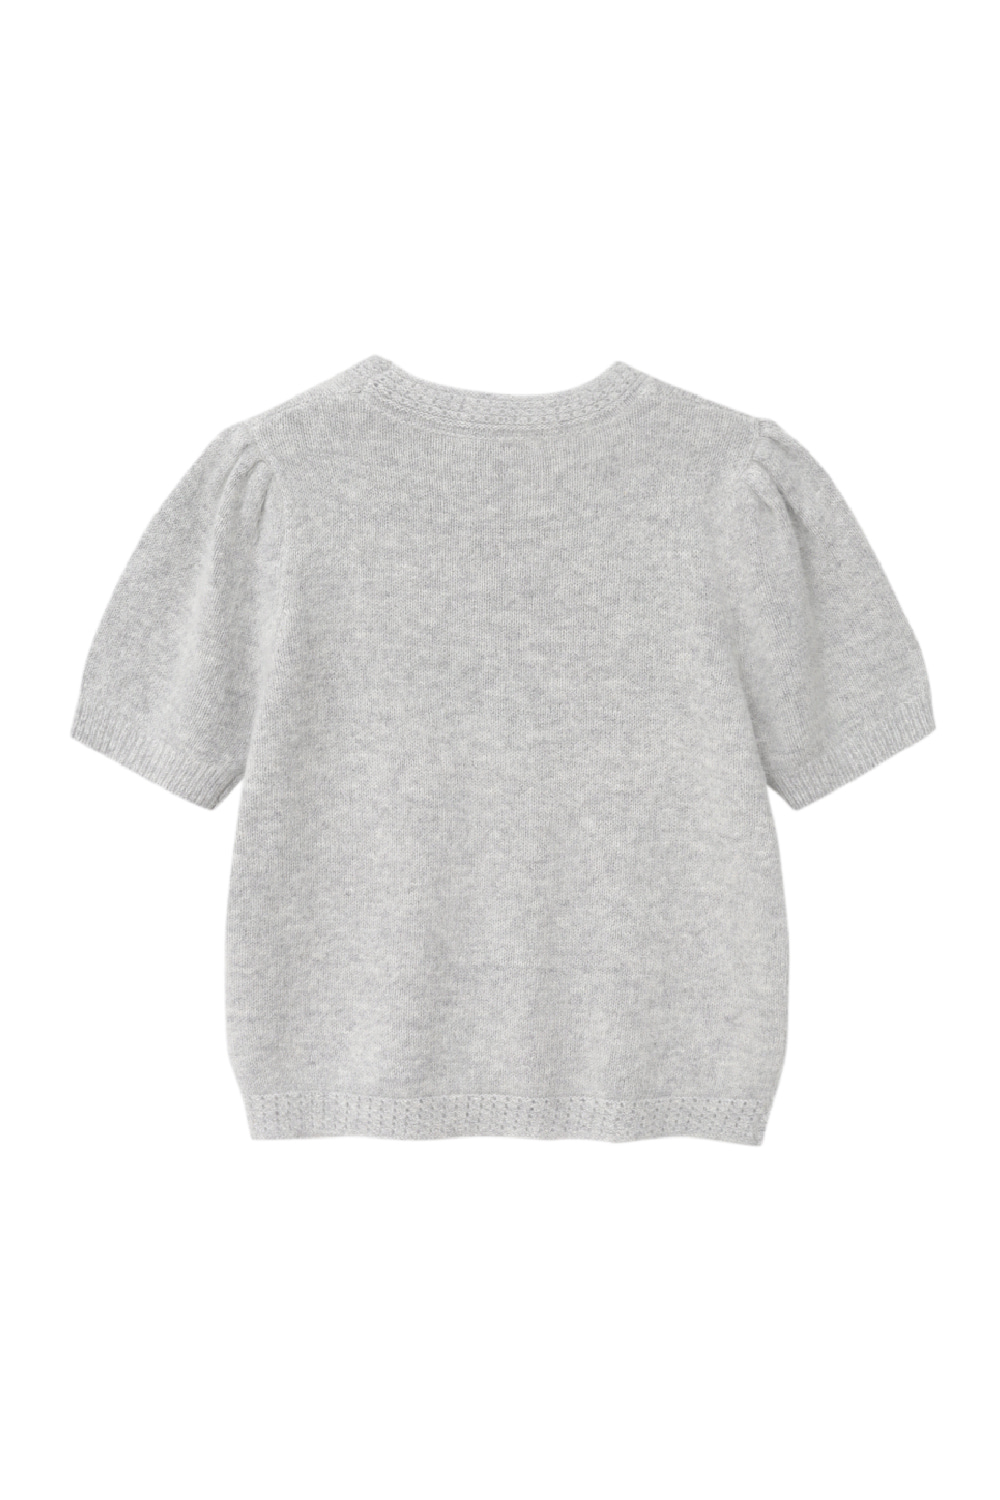 Lace Trimmed Puff Sleeve Knit Top (Gray)